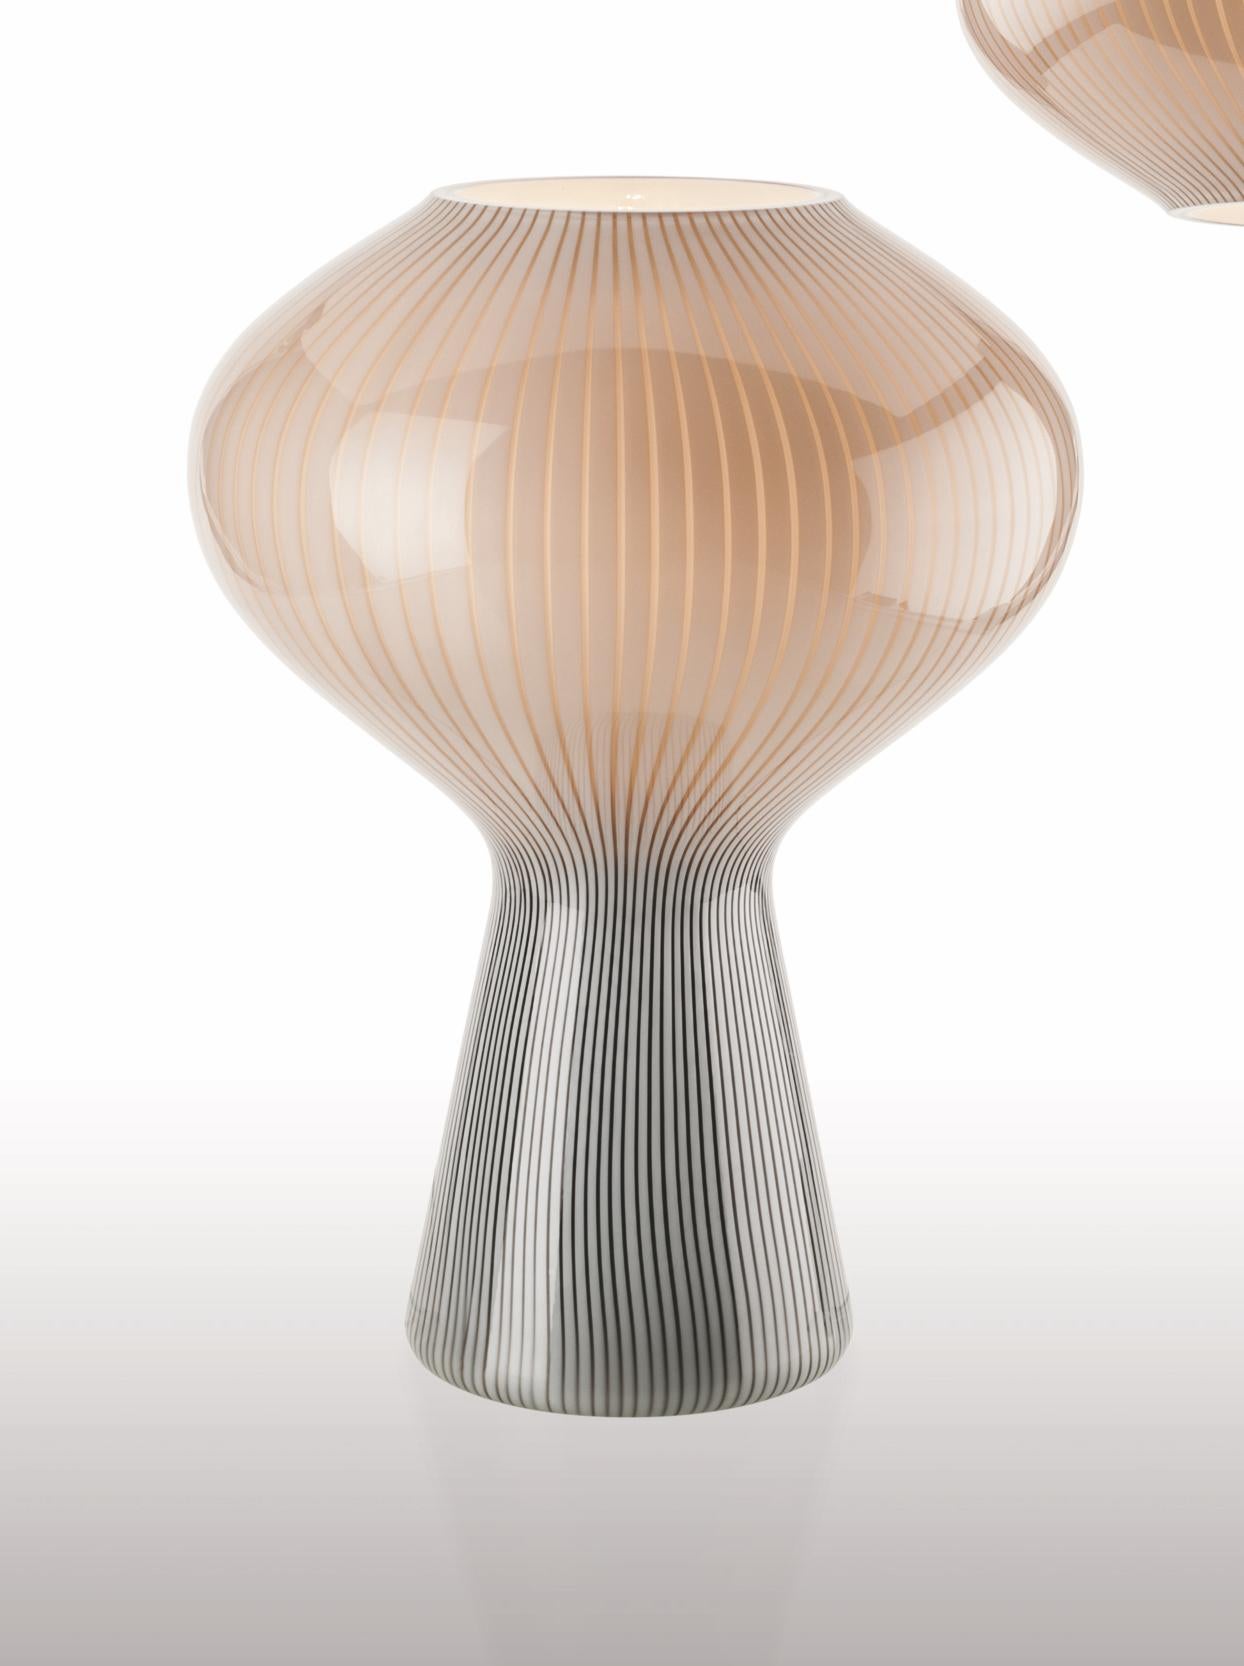 Glass table lamp with an interesting shape and two-tone coloring. Its sleek design and muted color pallette make it a modern, simple and understated lighting option for any space. Also available as a pendant light. 

Light source: One max E27